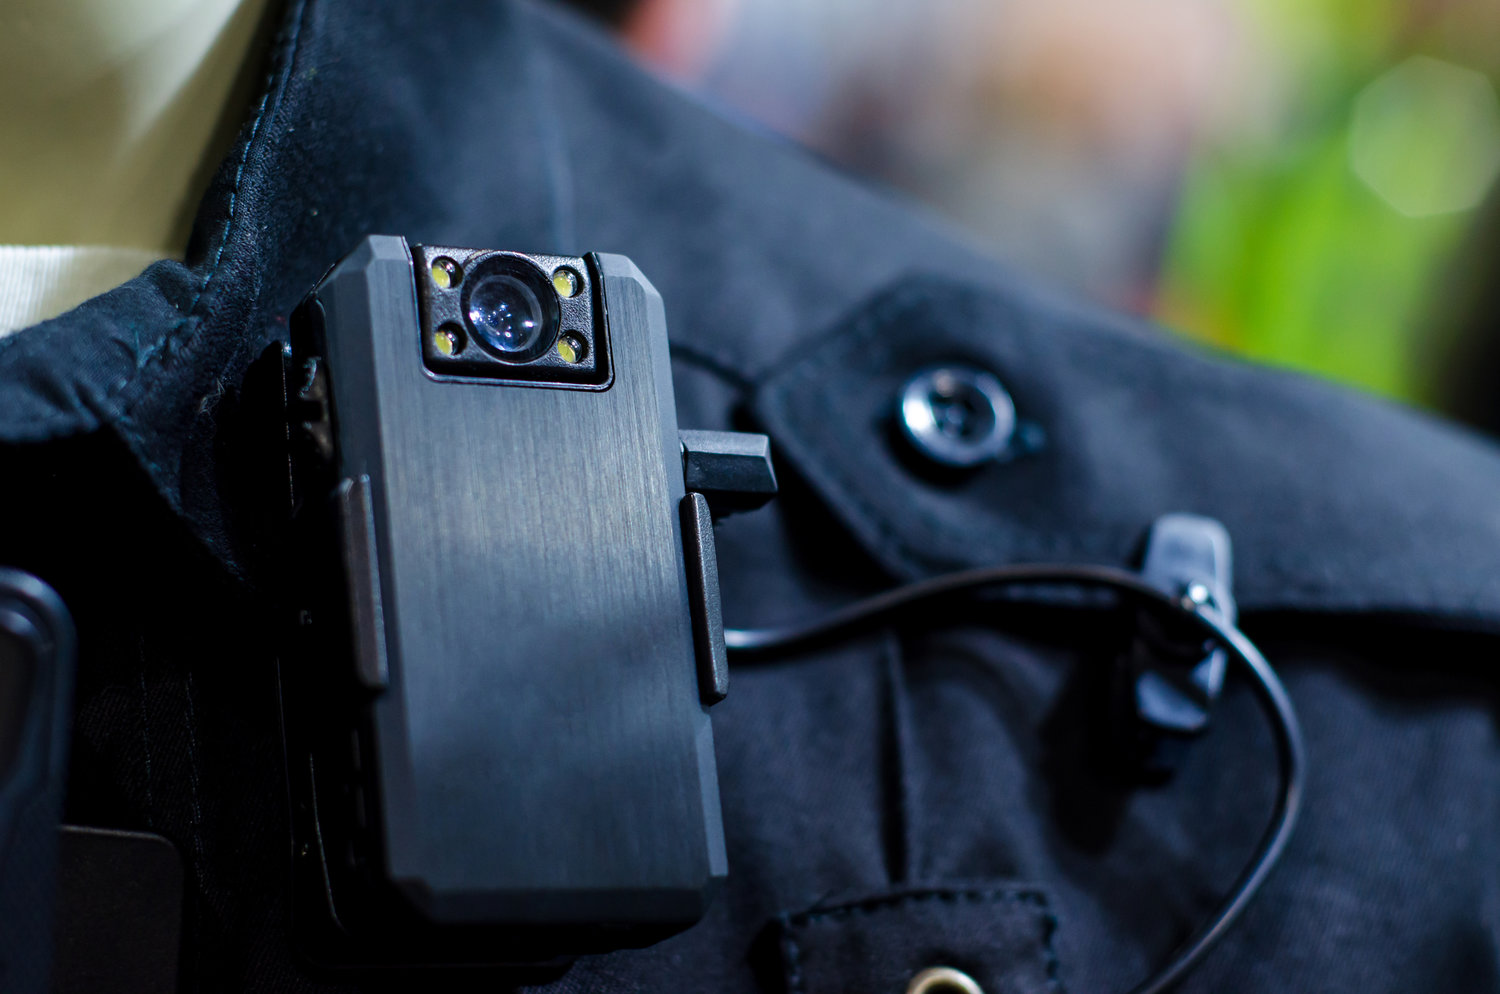 This is a close-up of a police body camera similar in function to what police throughout Washington will be using, according to new laws passed by the legislature in 2021.